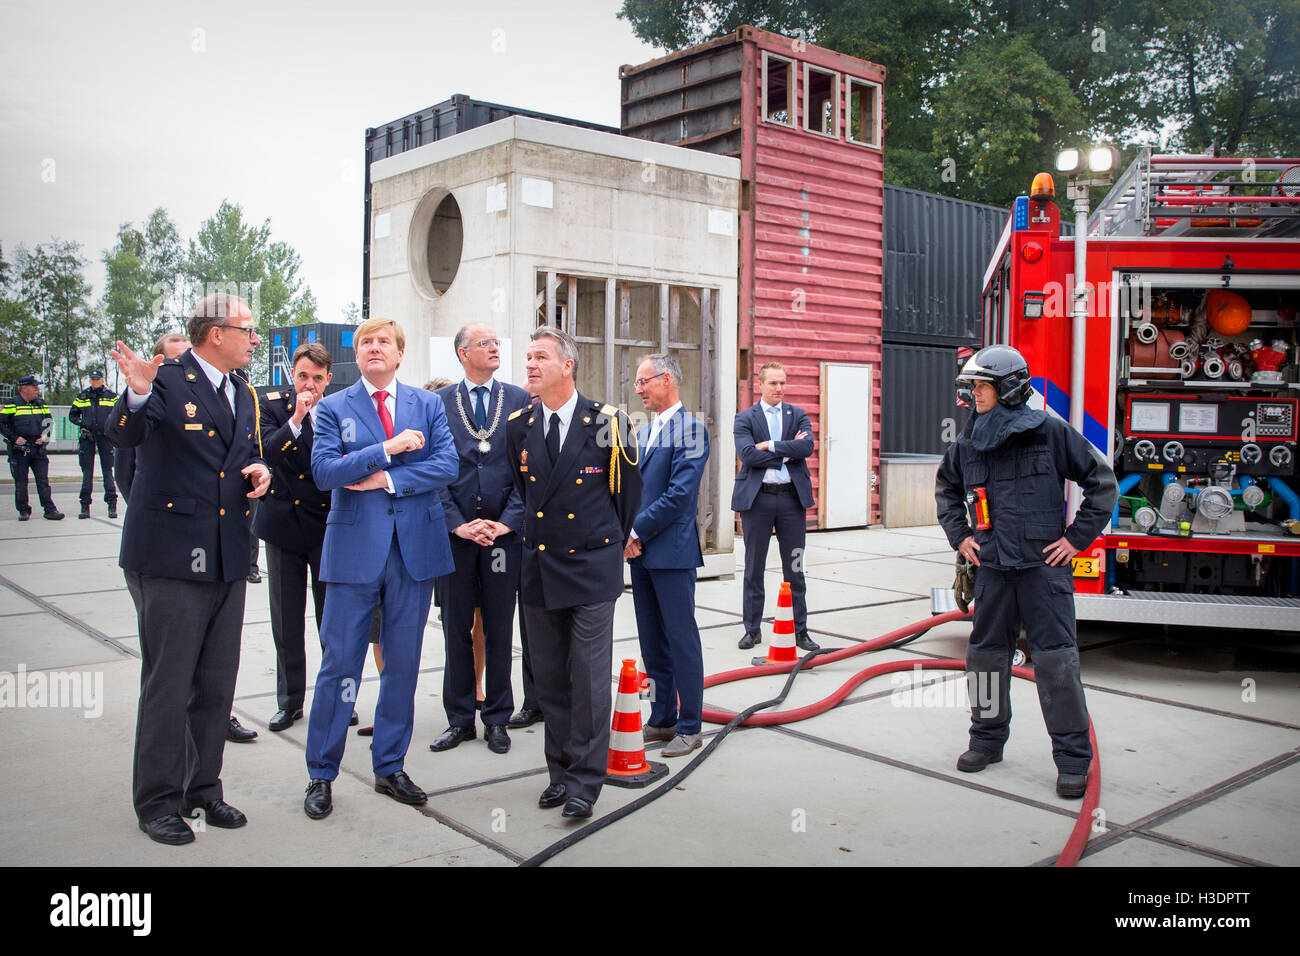 Deurningen, The Netherlands. 6th Oct, 2016. King Willem-Alexander of The Netherlands (2nd L) visits the Twente Safety Campus in Deurningen, The Netherlands, 6 October 2016. At the campus school children and the elderly how to react in dangerous situations. Photo: Patrick van Katwijk//POINT DE VUE OUT/dpa/Alamy Live News Stock Photo